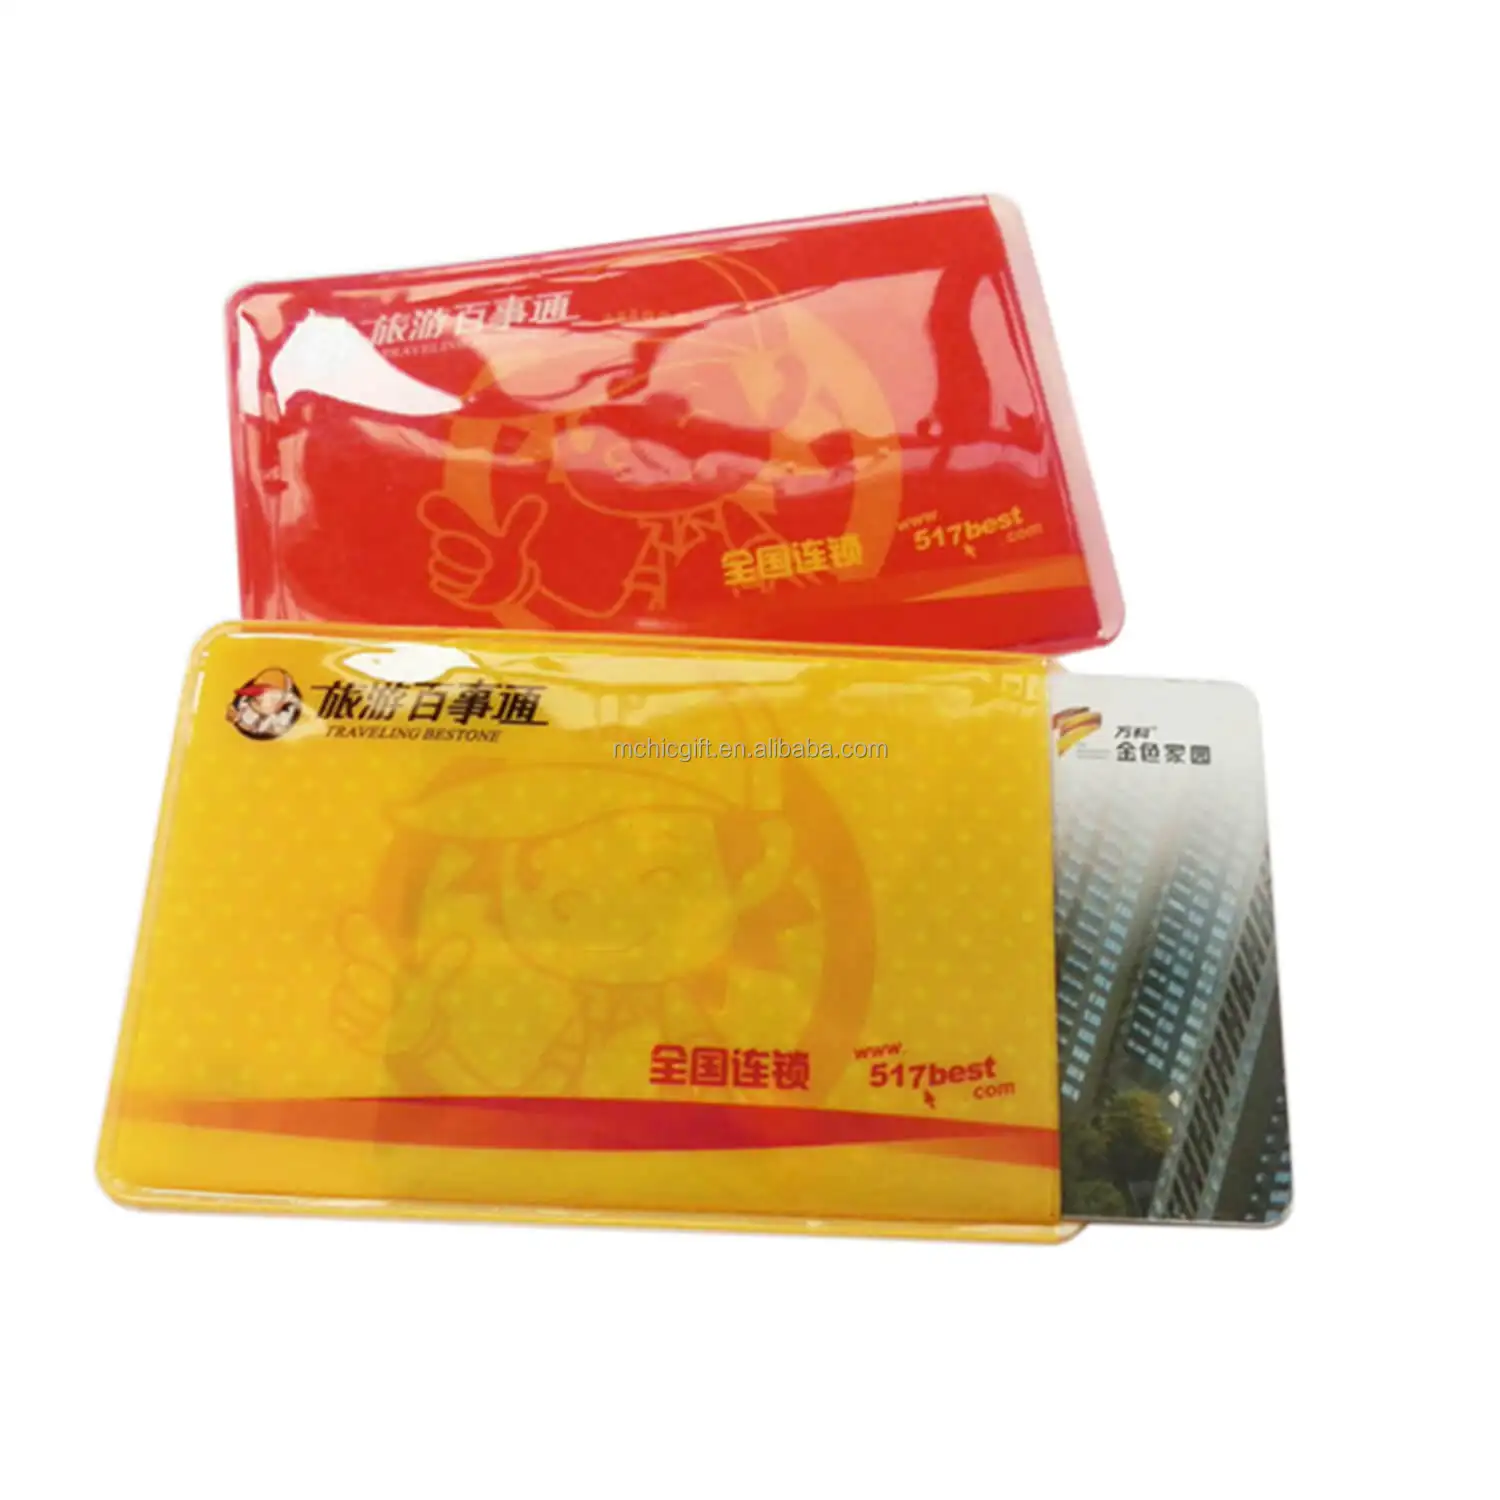 escaleren Monumentaal compressie Customized Full Color Print Soft Plastic Atm Card Pouch,Flexible Pvc Atm  Card Holder,Credit Card Sleeve - Buy Atm Card Pouch,Pvc Atm Card Cover,Atm  Card Holder Product on Alibaba.com